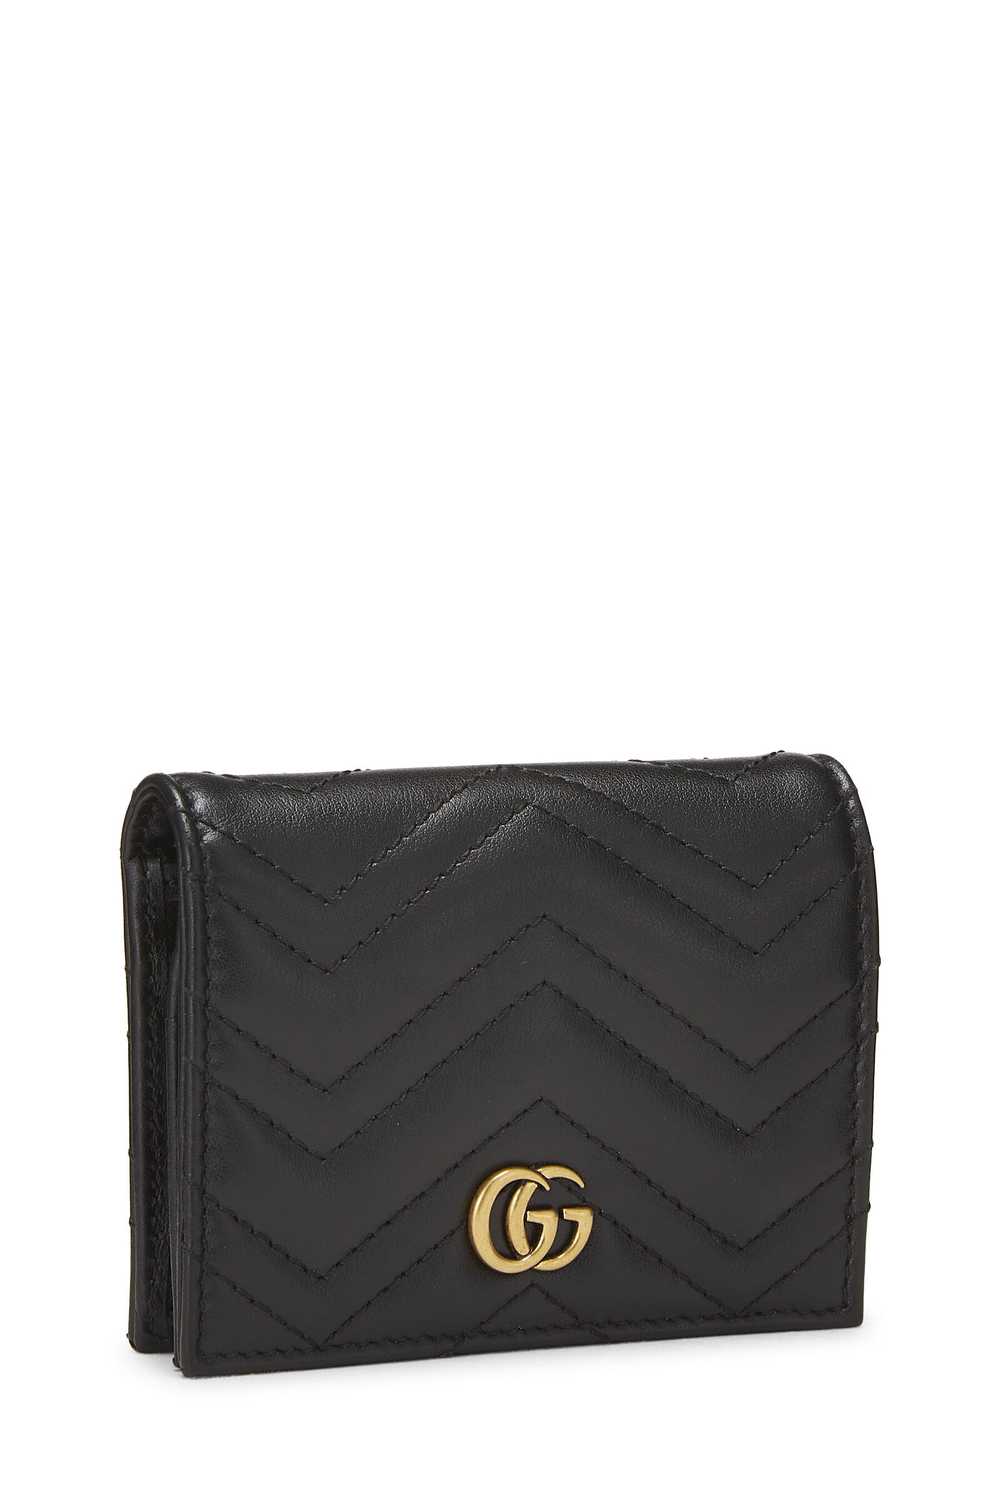 Black Leather Marmont Card Case - image 2